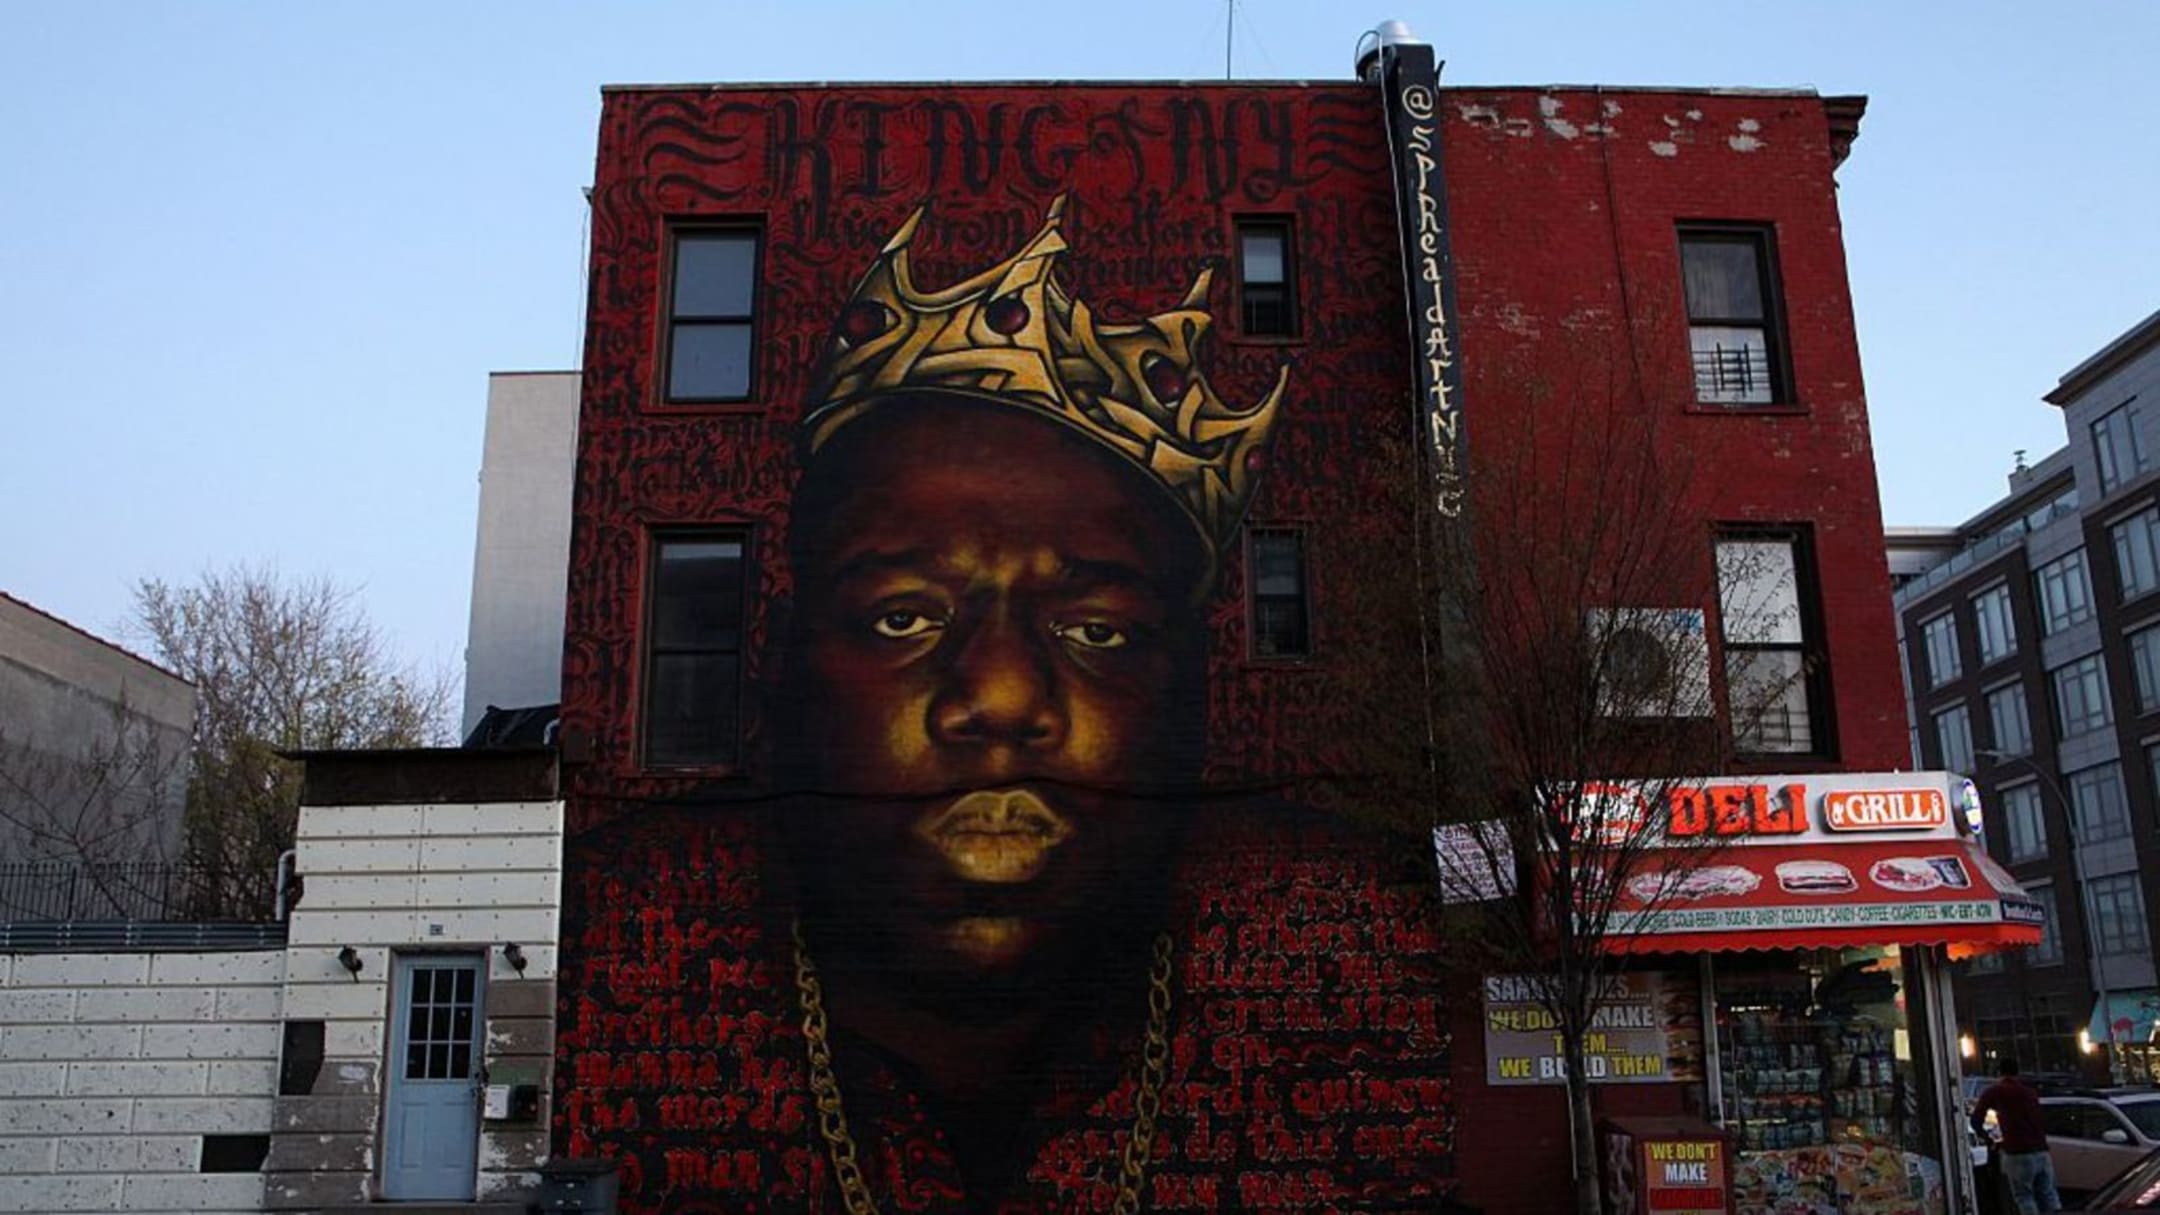 The Notorious B.I.G.: Looking back at the life and legacy of the